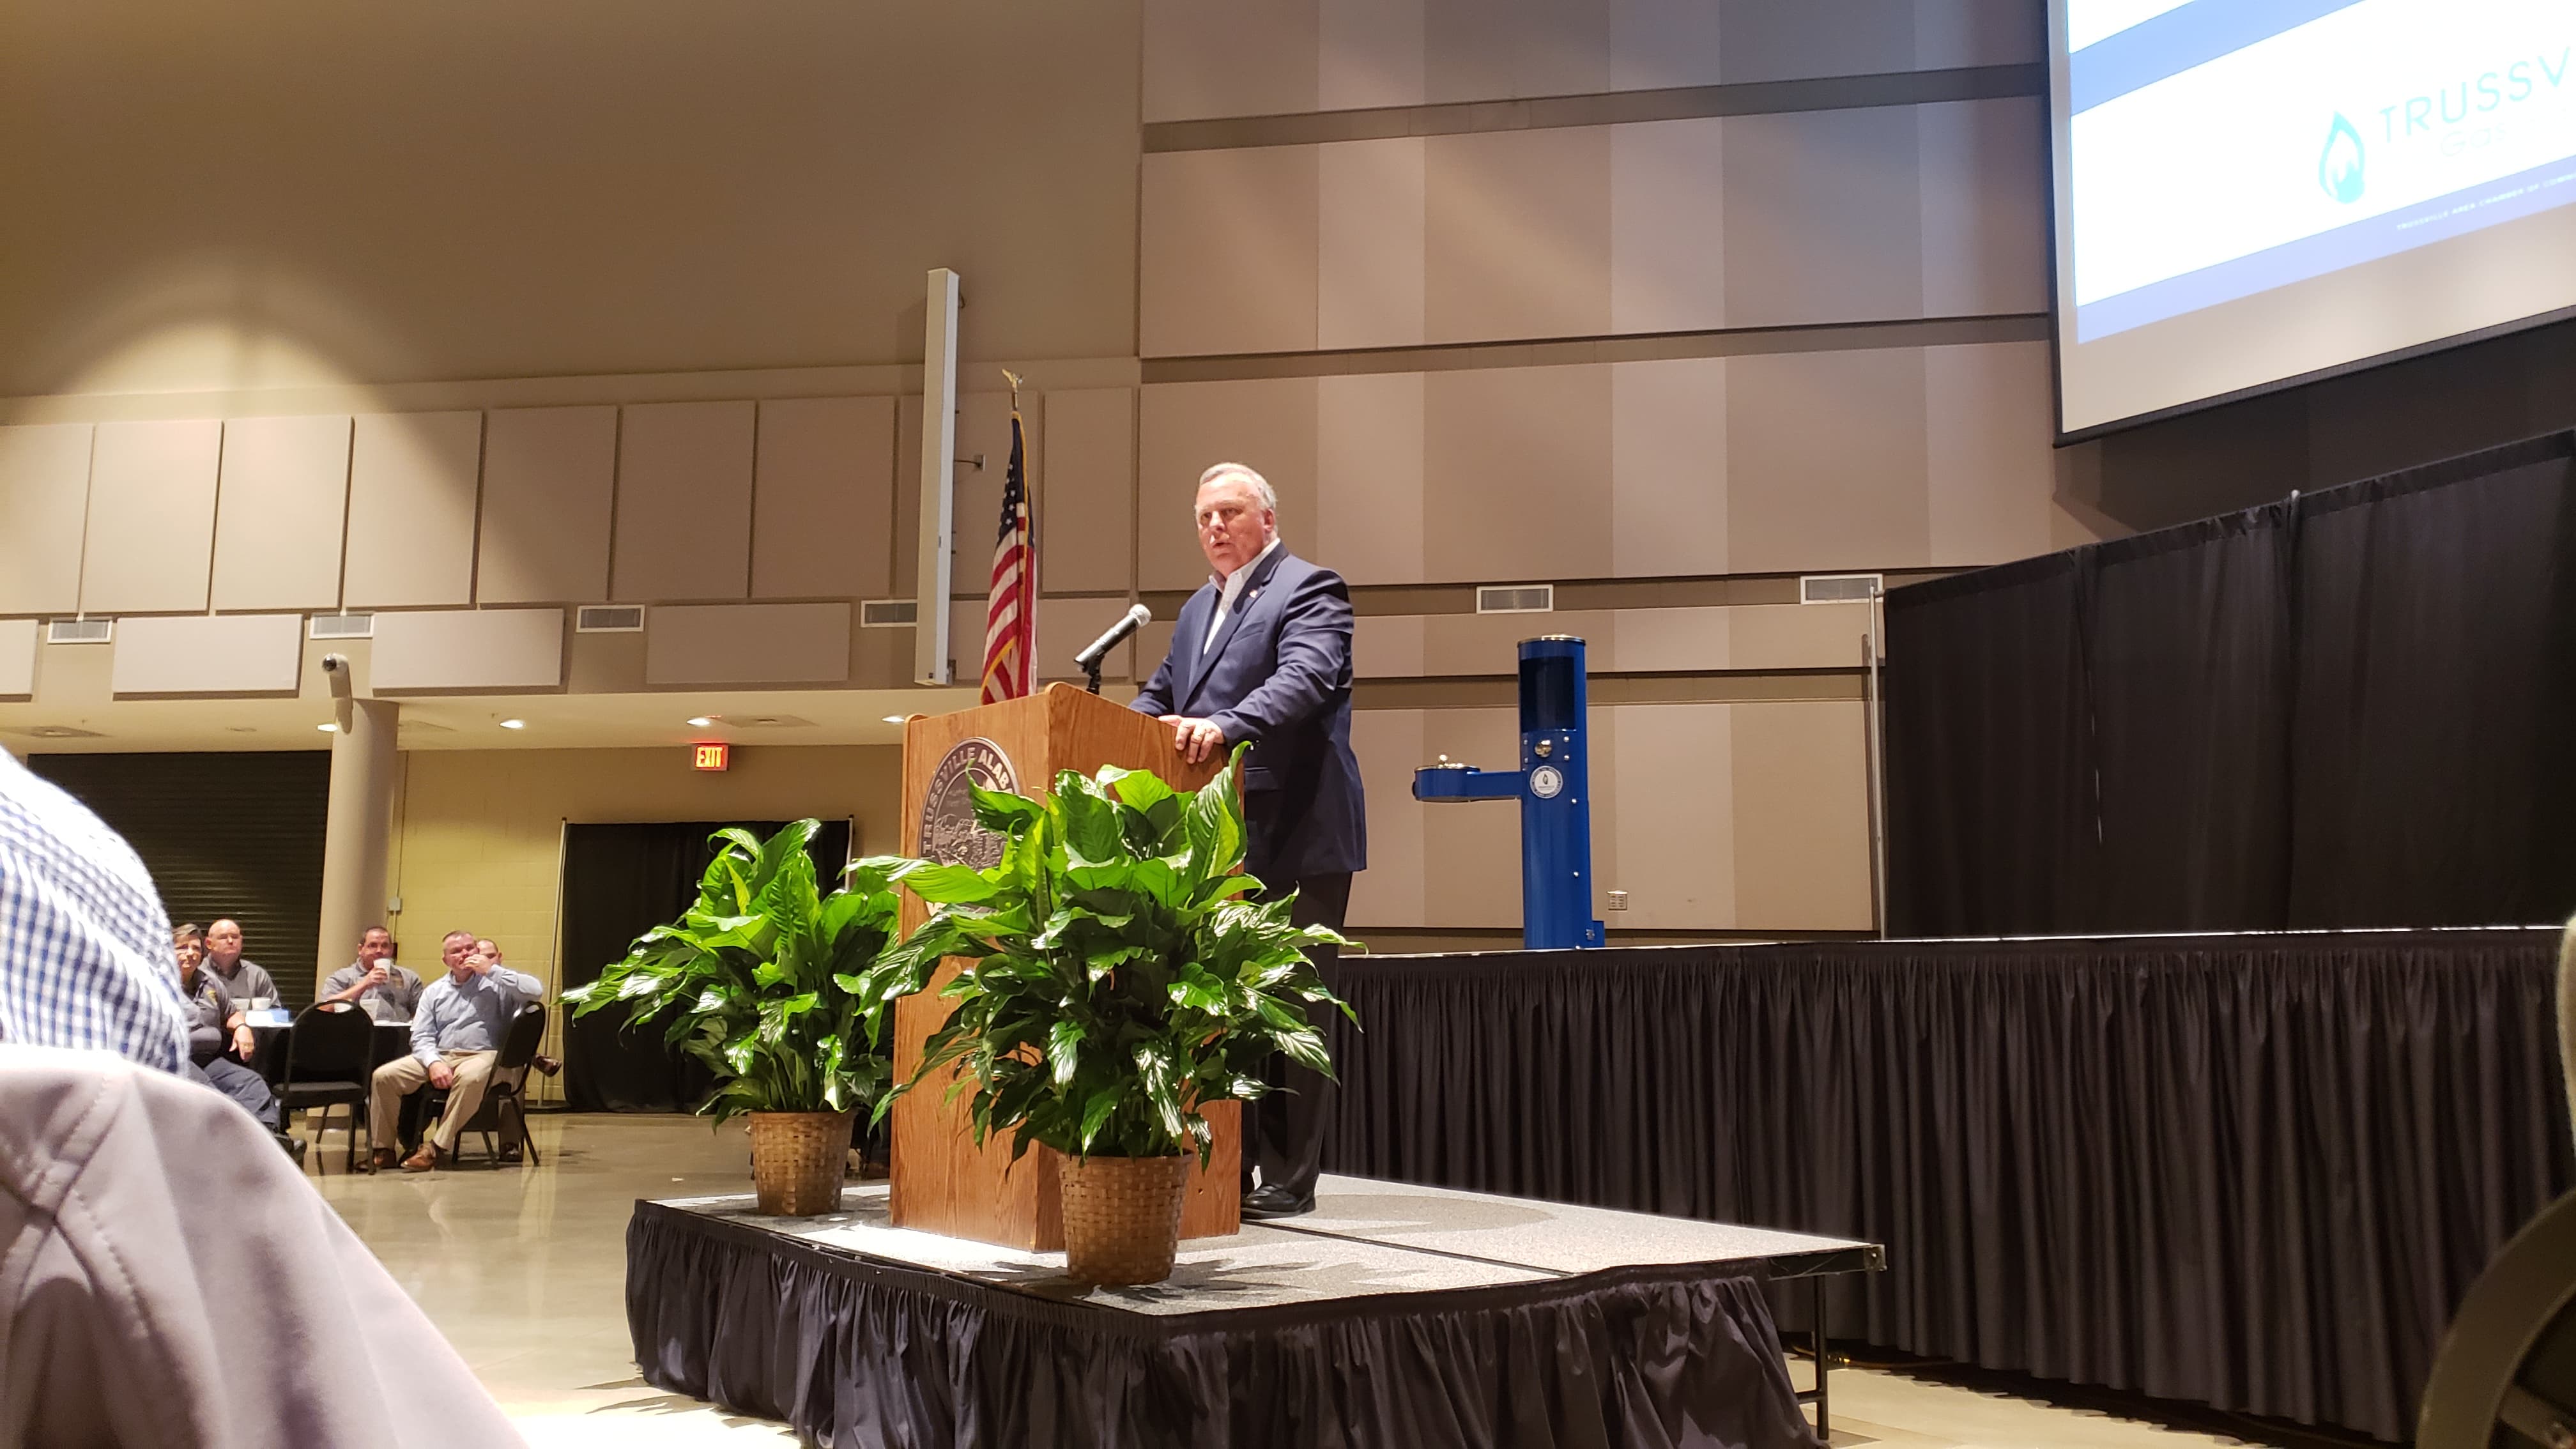 VIDEO: Trussville mayor talks widening of Hwy 11 and 2040 plan at Chamber luncheon